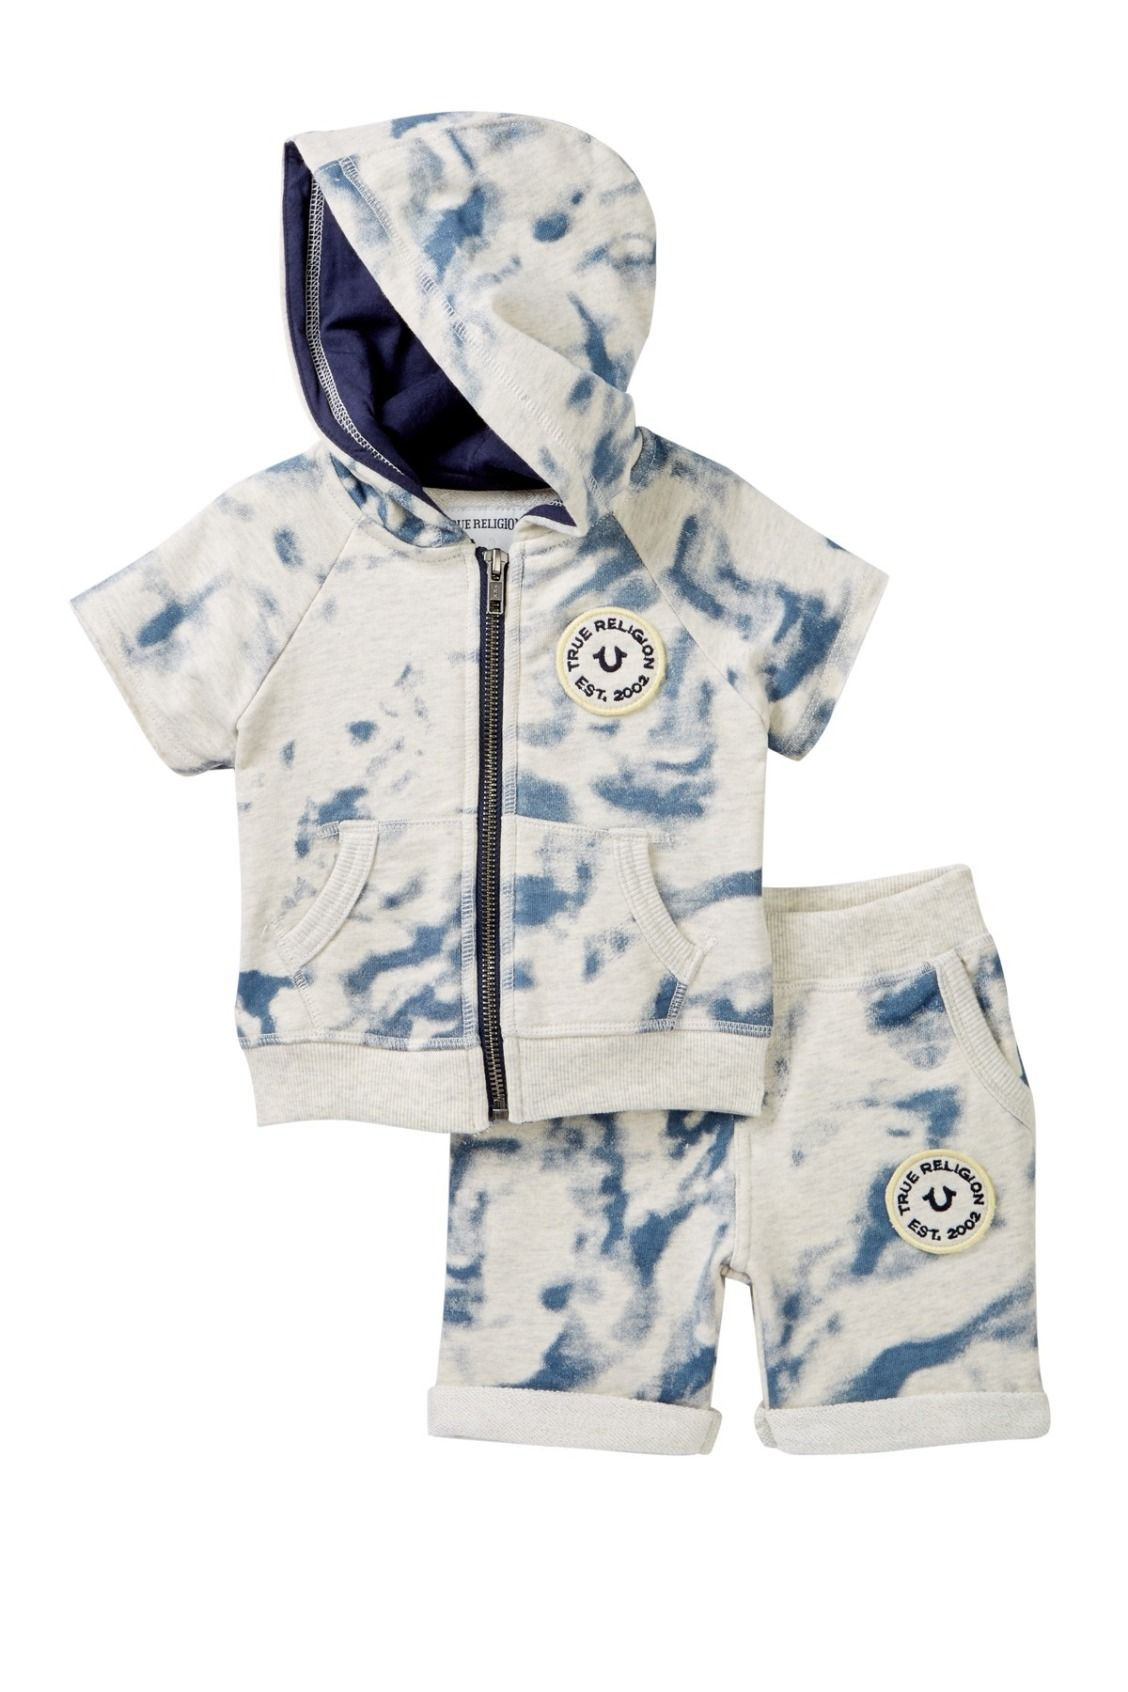 Baby True Religion Gift Sets
 Pin on Kids Got Style